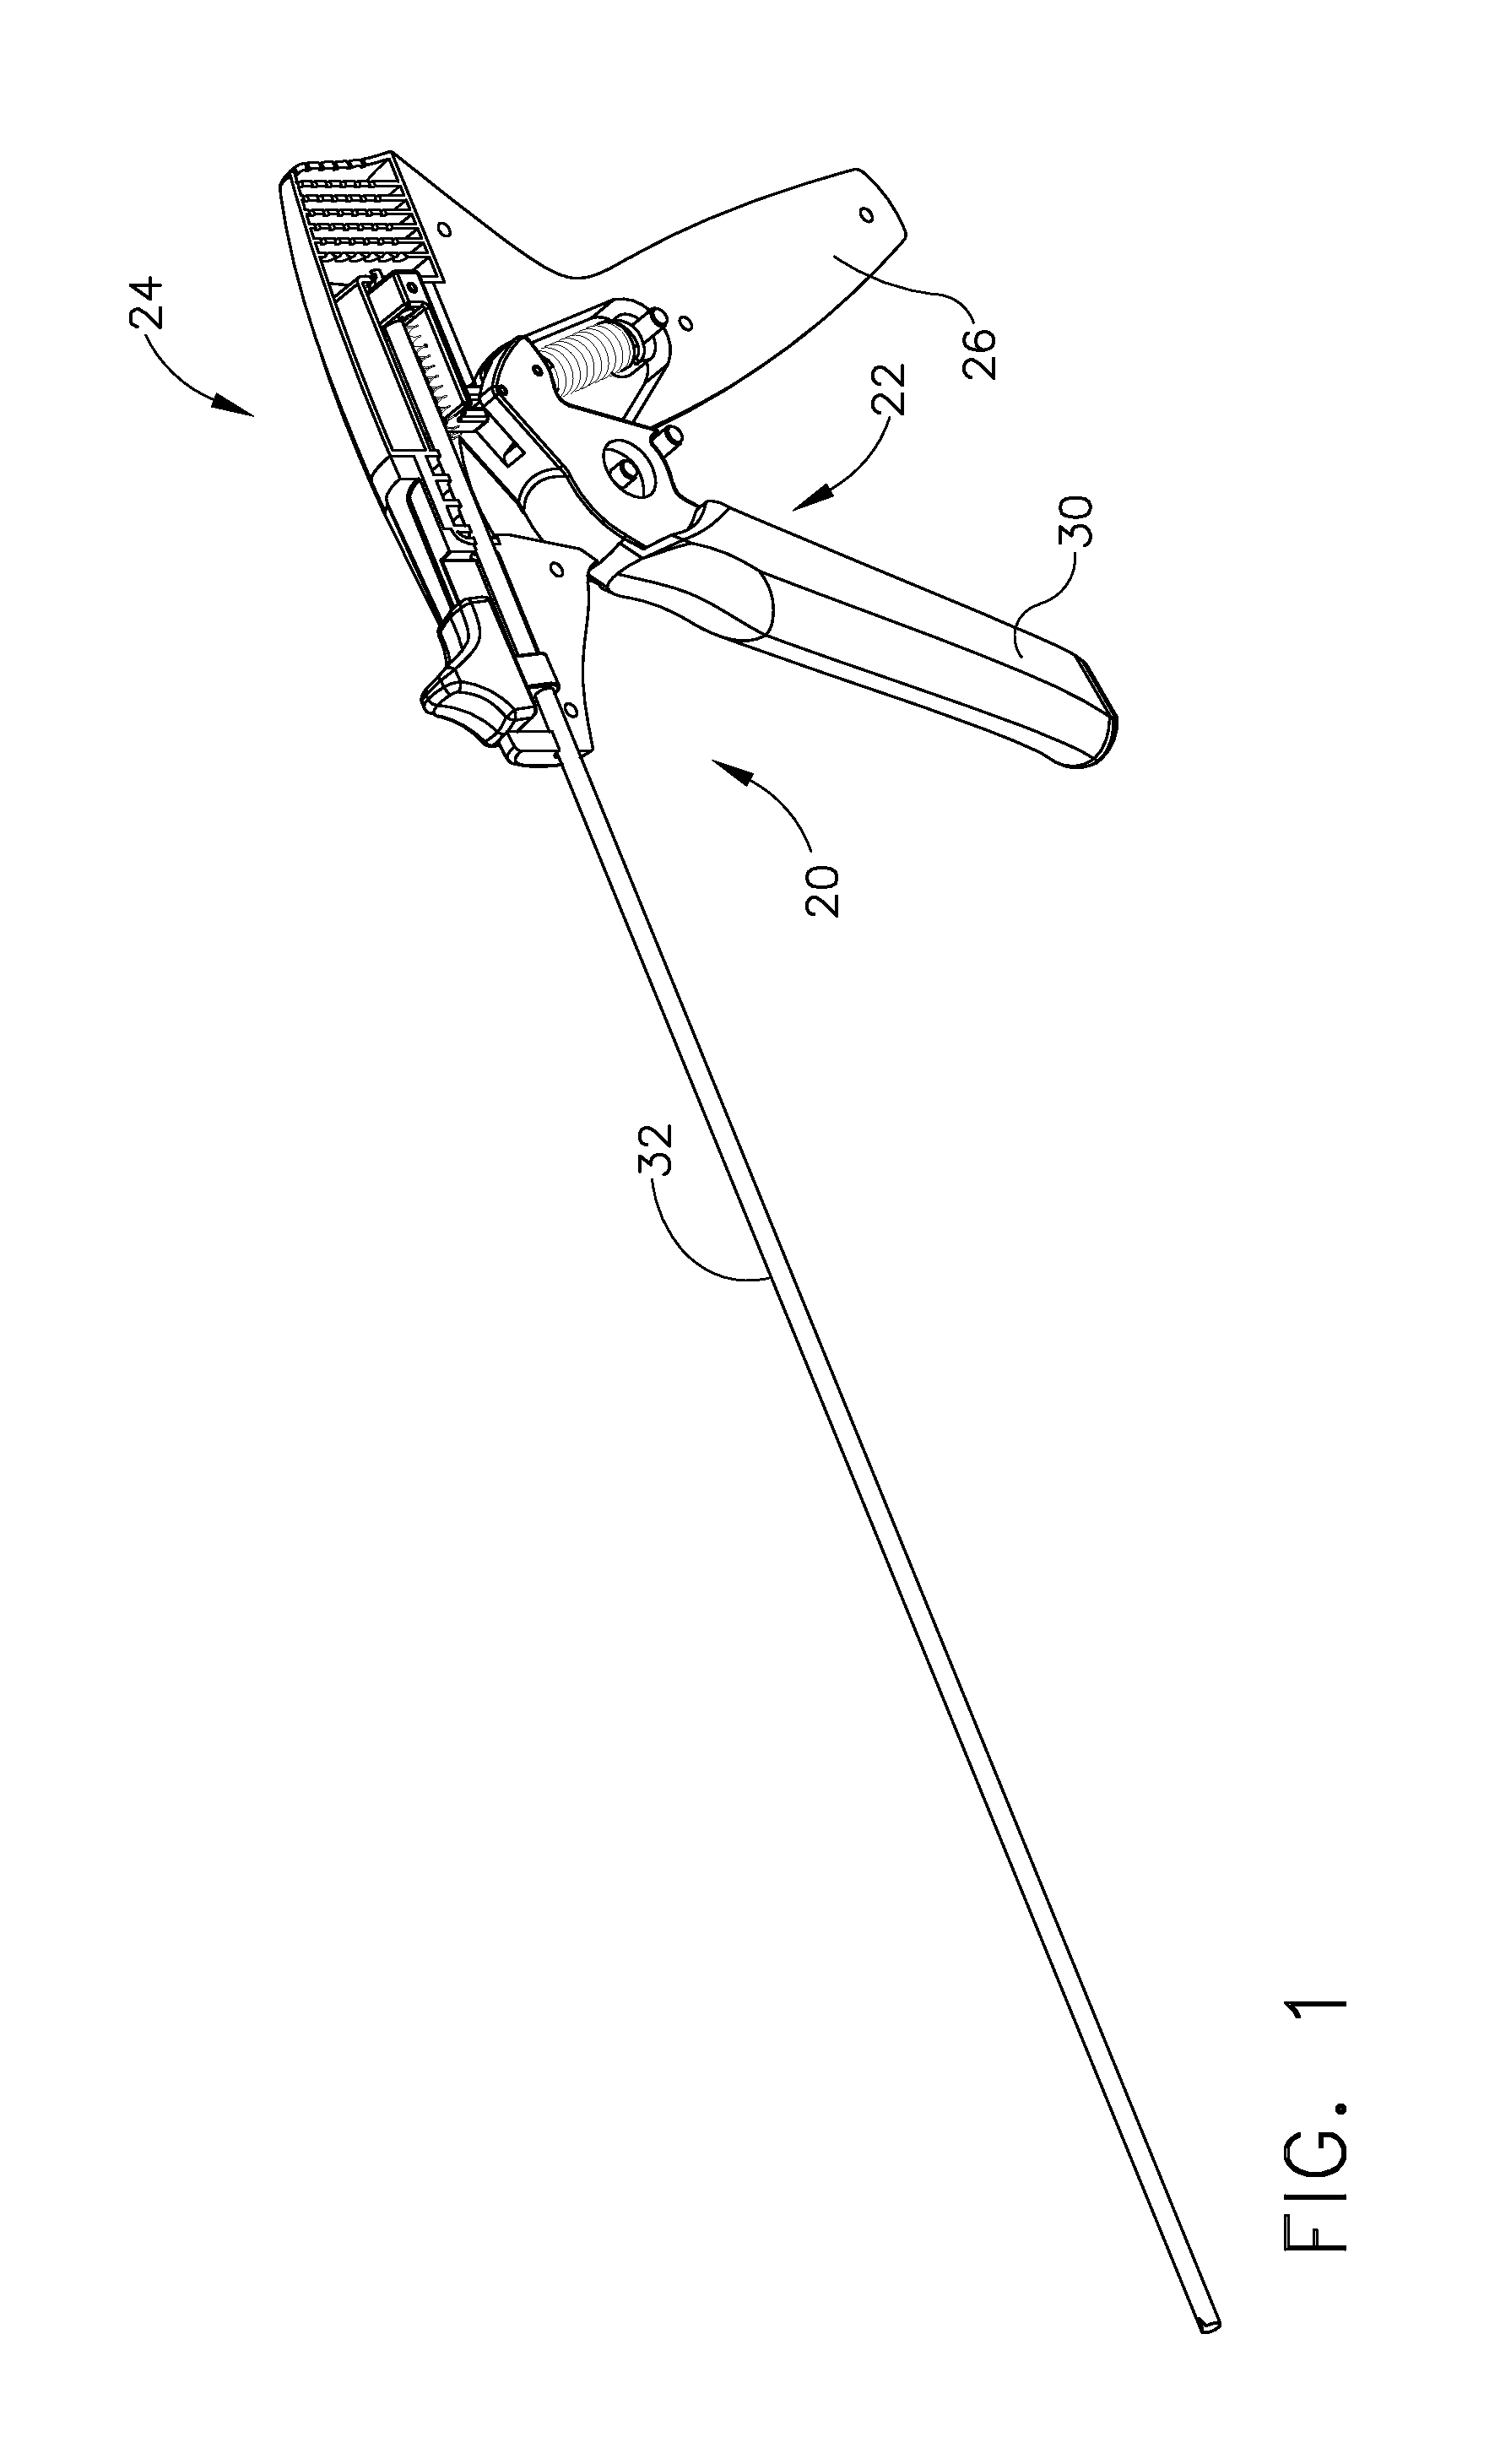 Method for deploying fasteners for use in a gastric volume reduction procedure